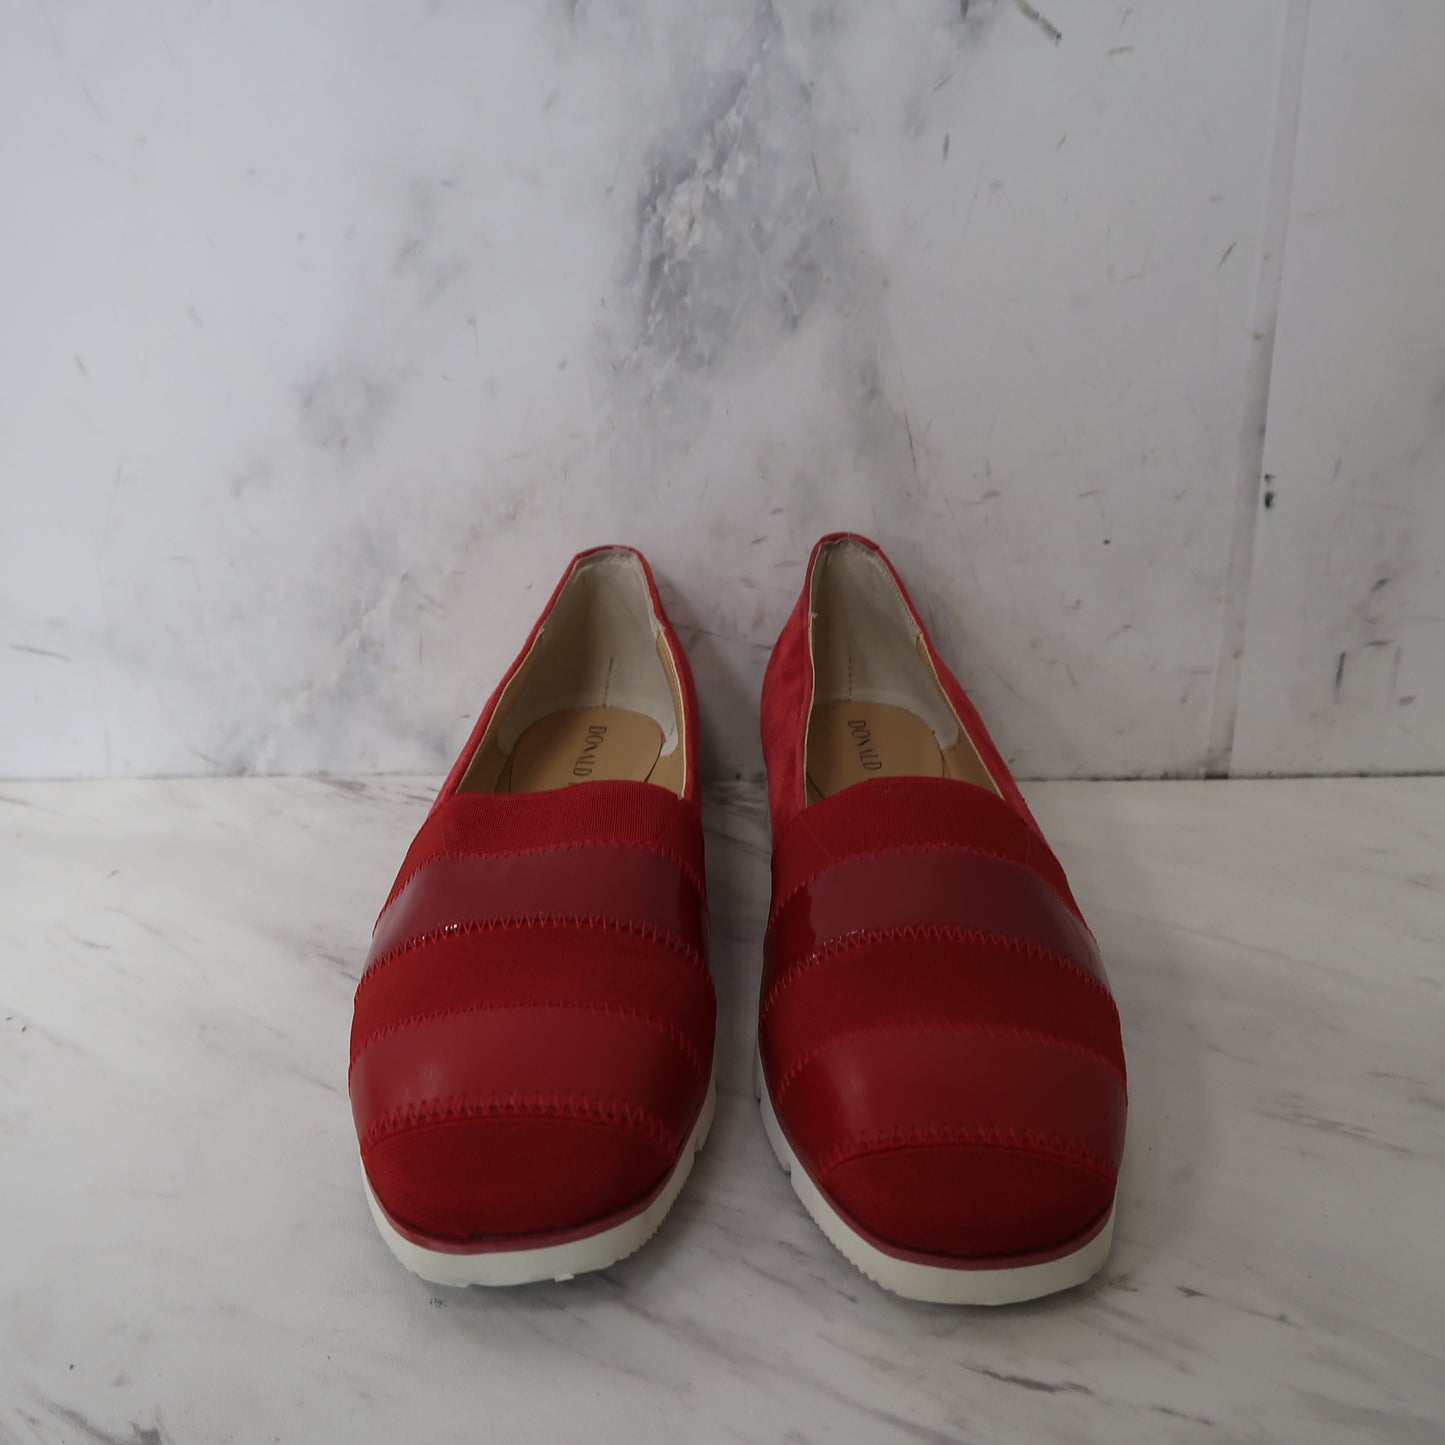 Shoes Flats Boat By Donald Pliner  Size: 7